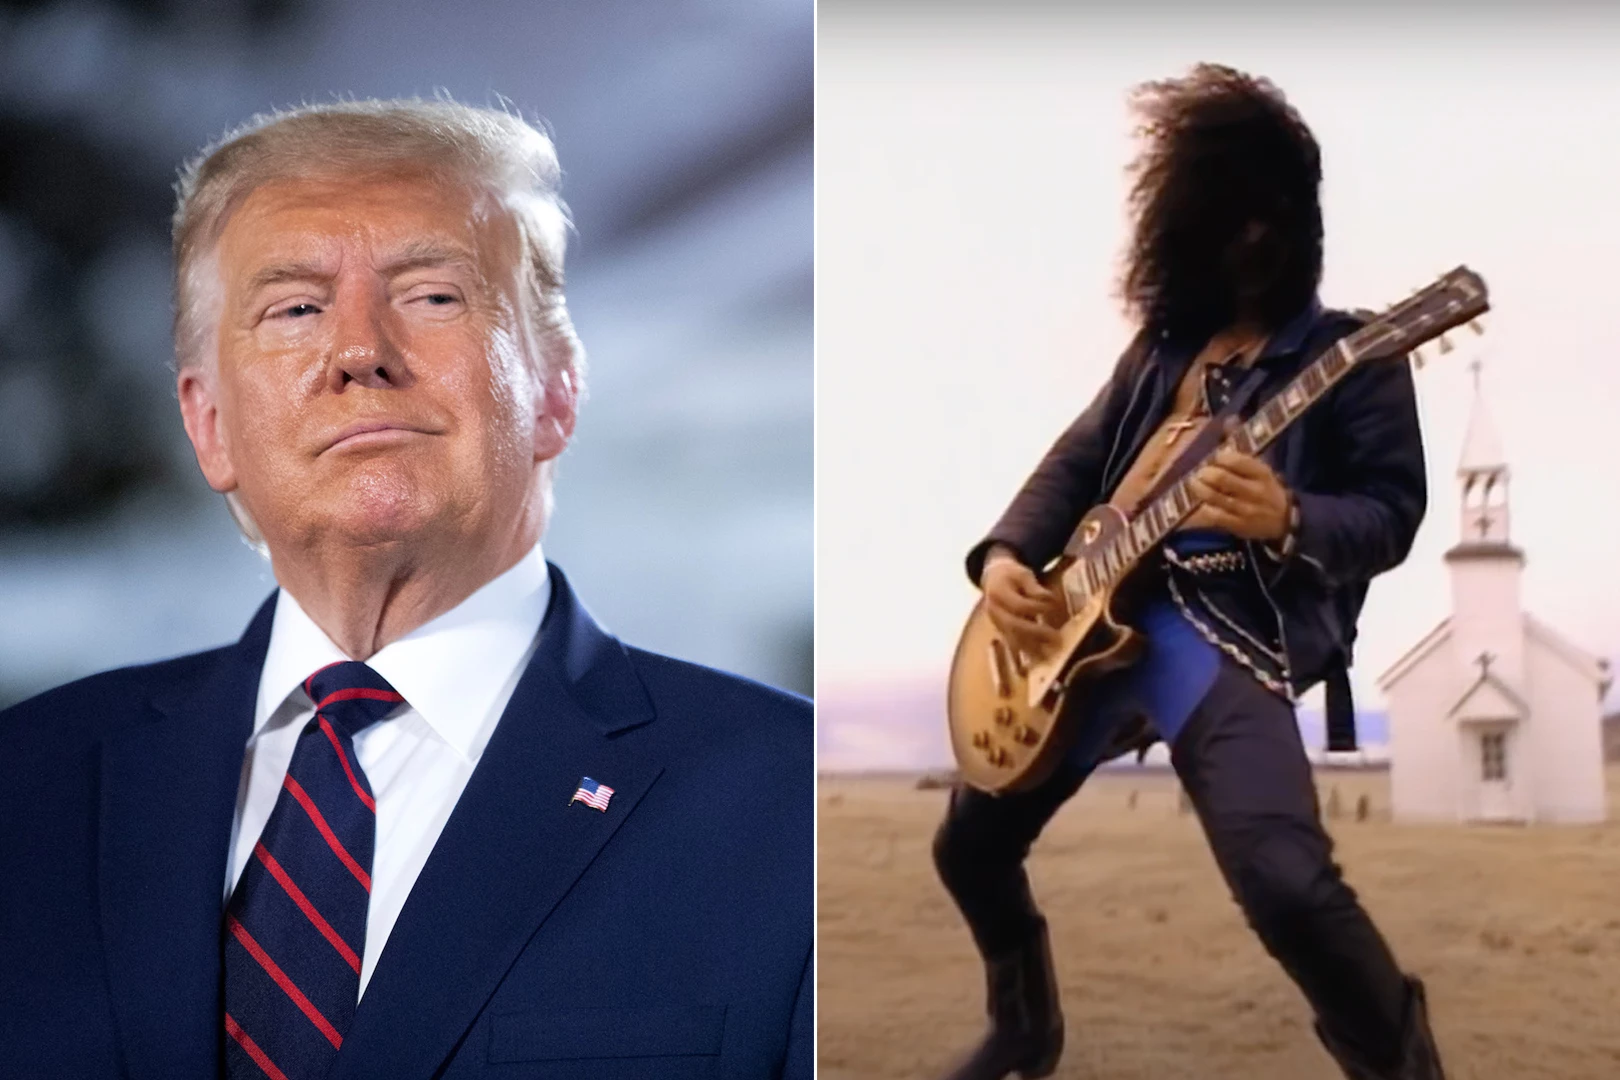 Trump November Rain Is The Greatest Music Video Of All Time